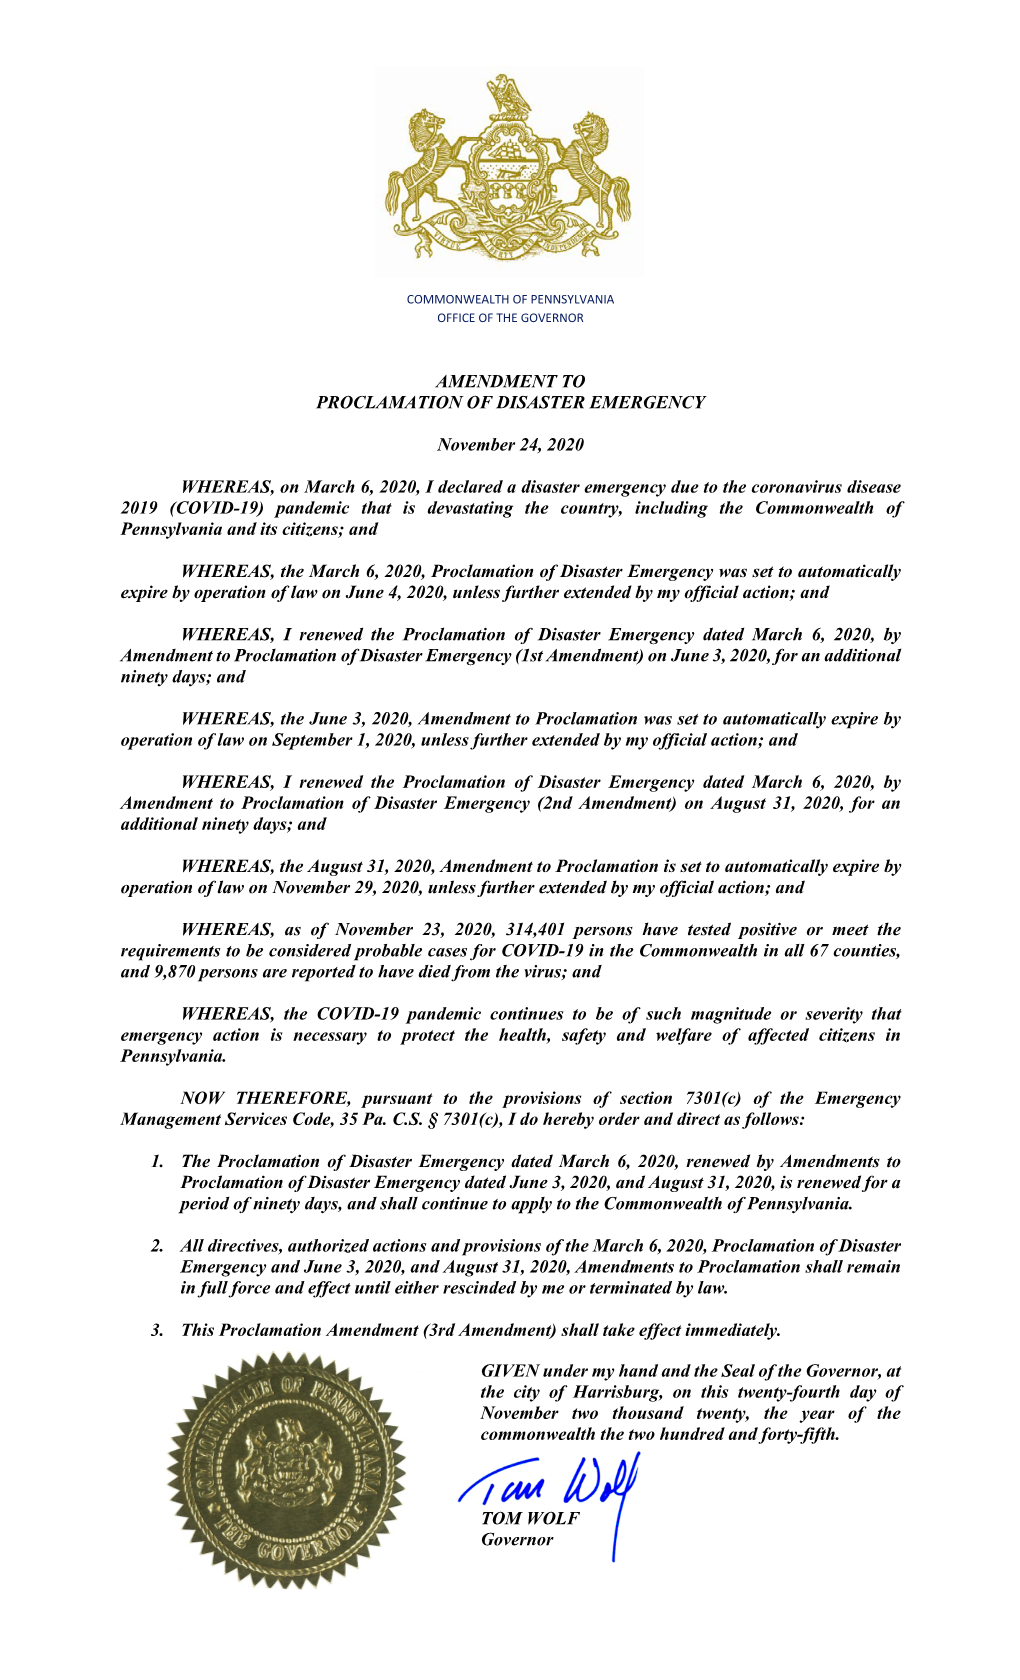 Amendment to Proclamation of Disaster Emergency